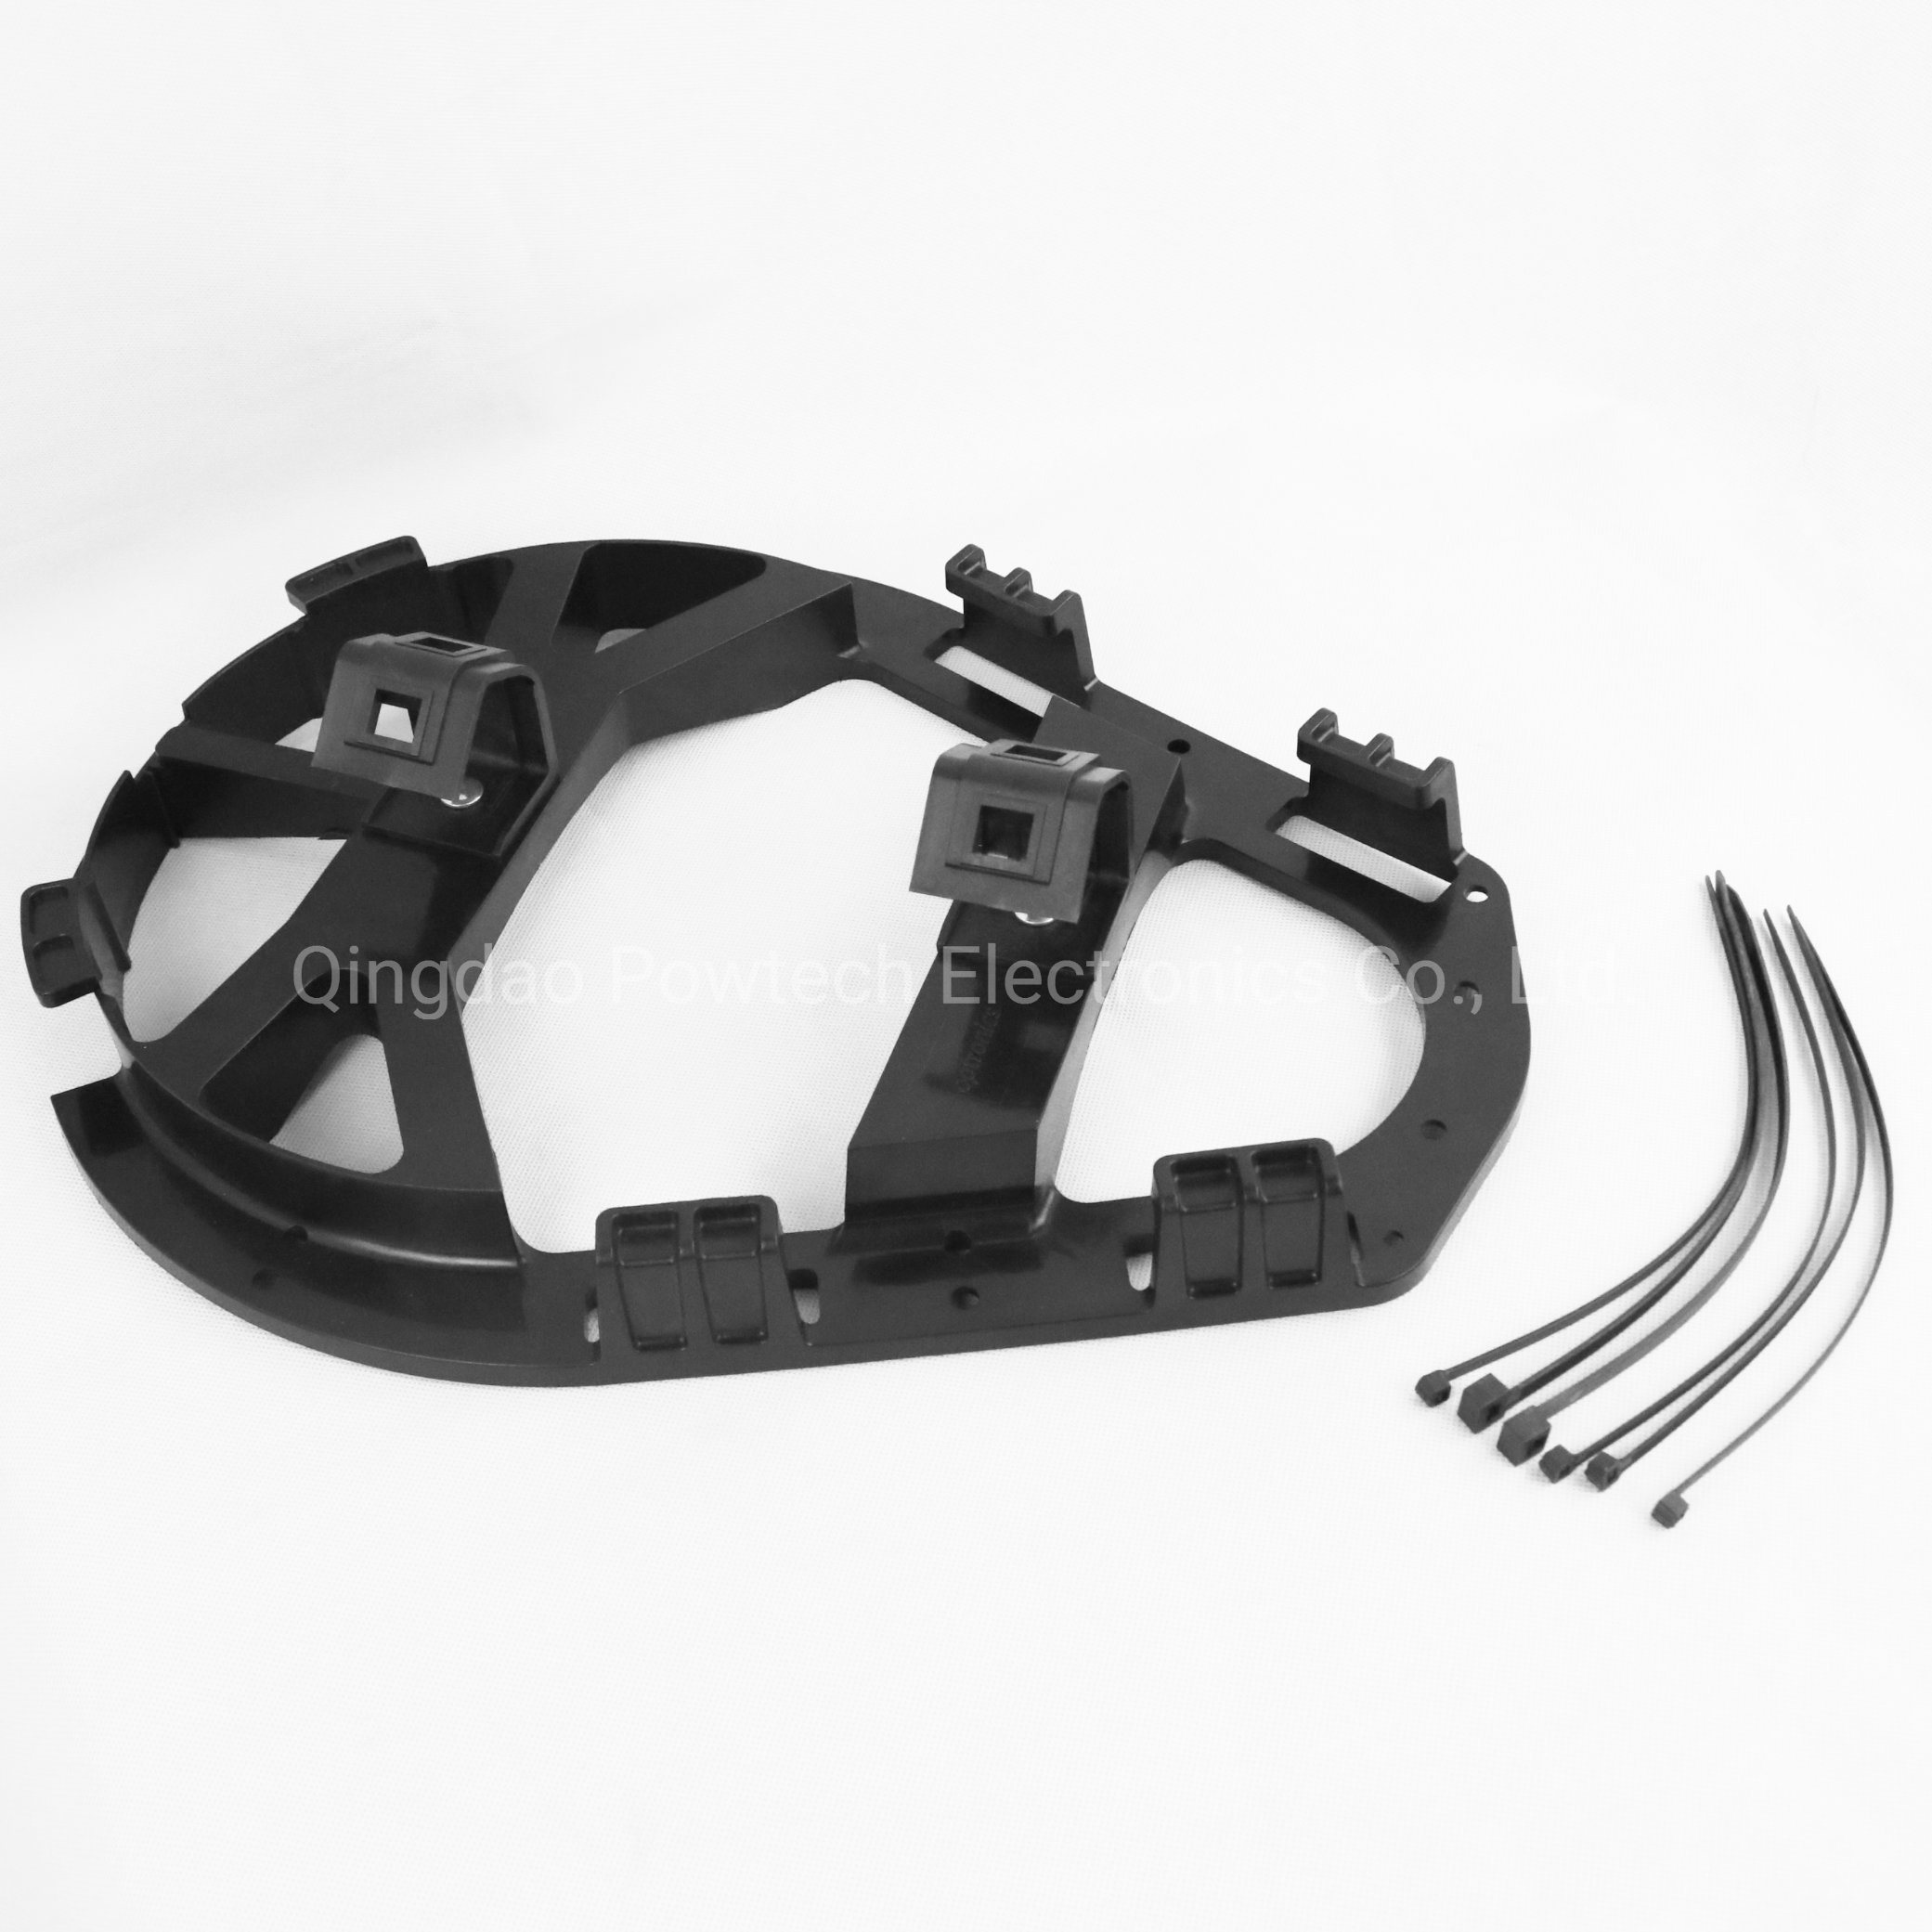 High Impact 12′ ′ ADSS Cable Storage Bracket